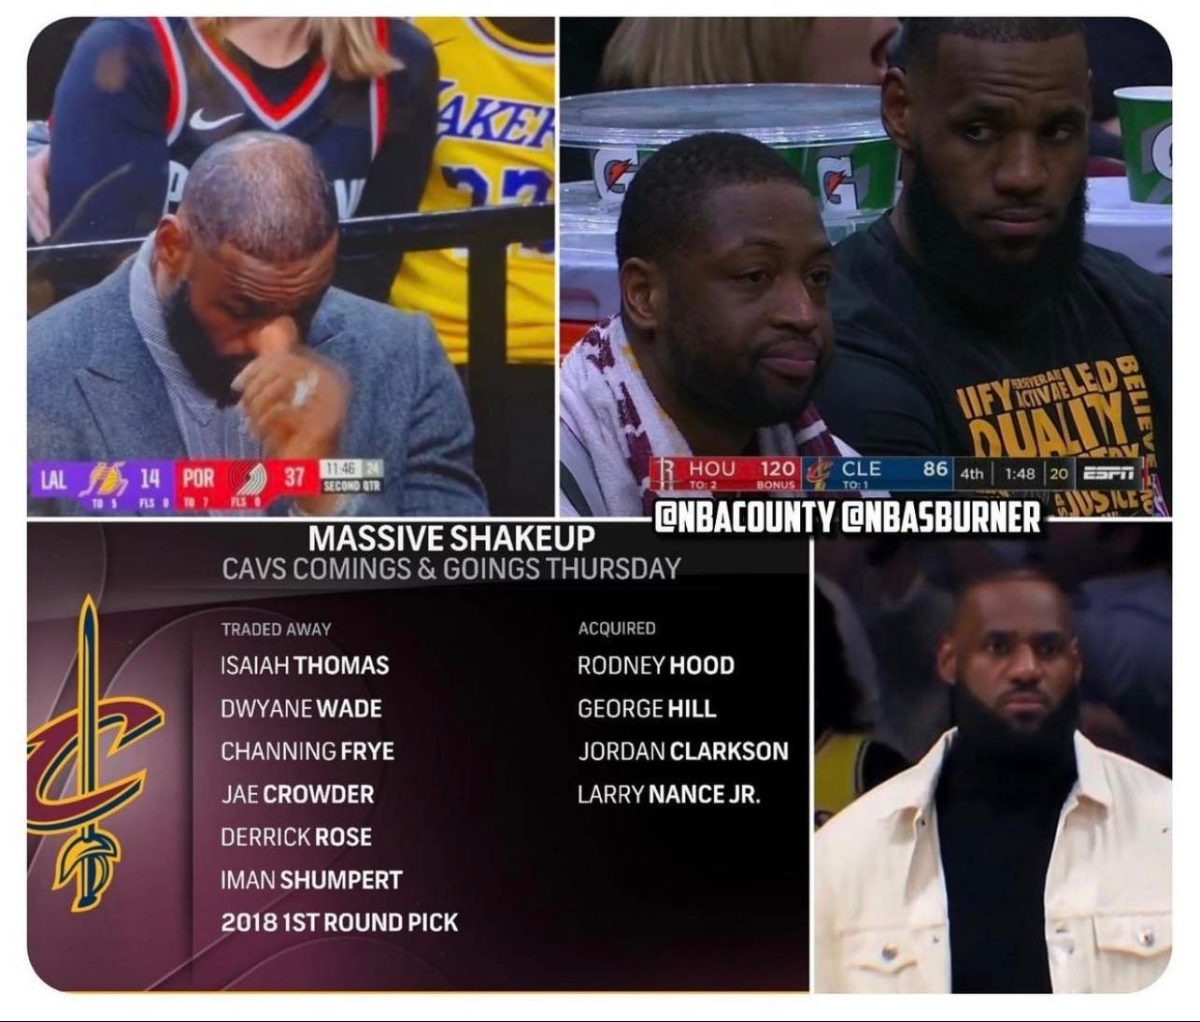 NBA Fans React To 'Stressed Out' LeBron James On Lakers Bench: "Last Time He Looked Like This, The Whole 2018 Cavs Core Was Traded